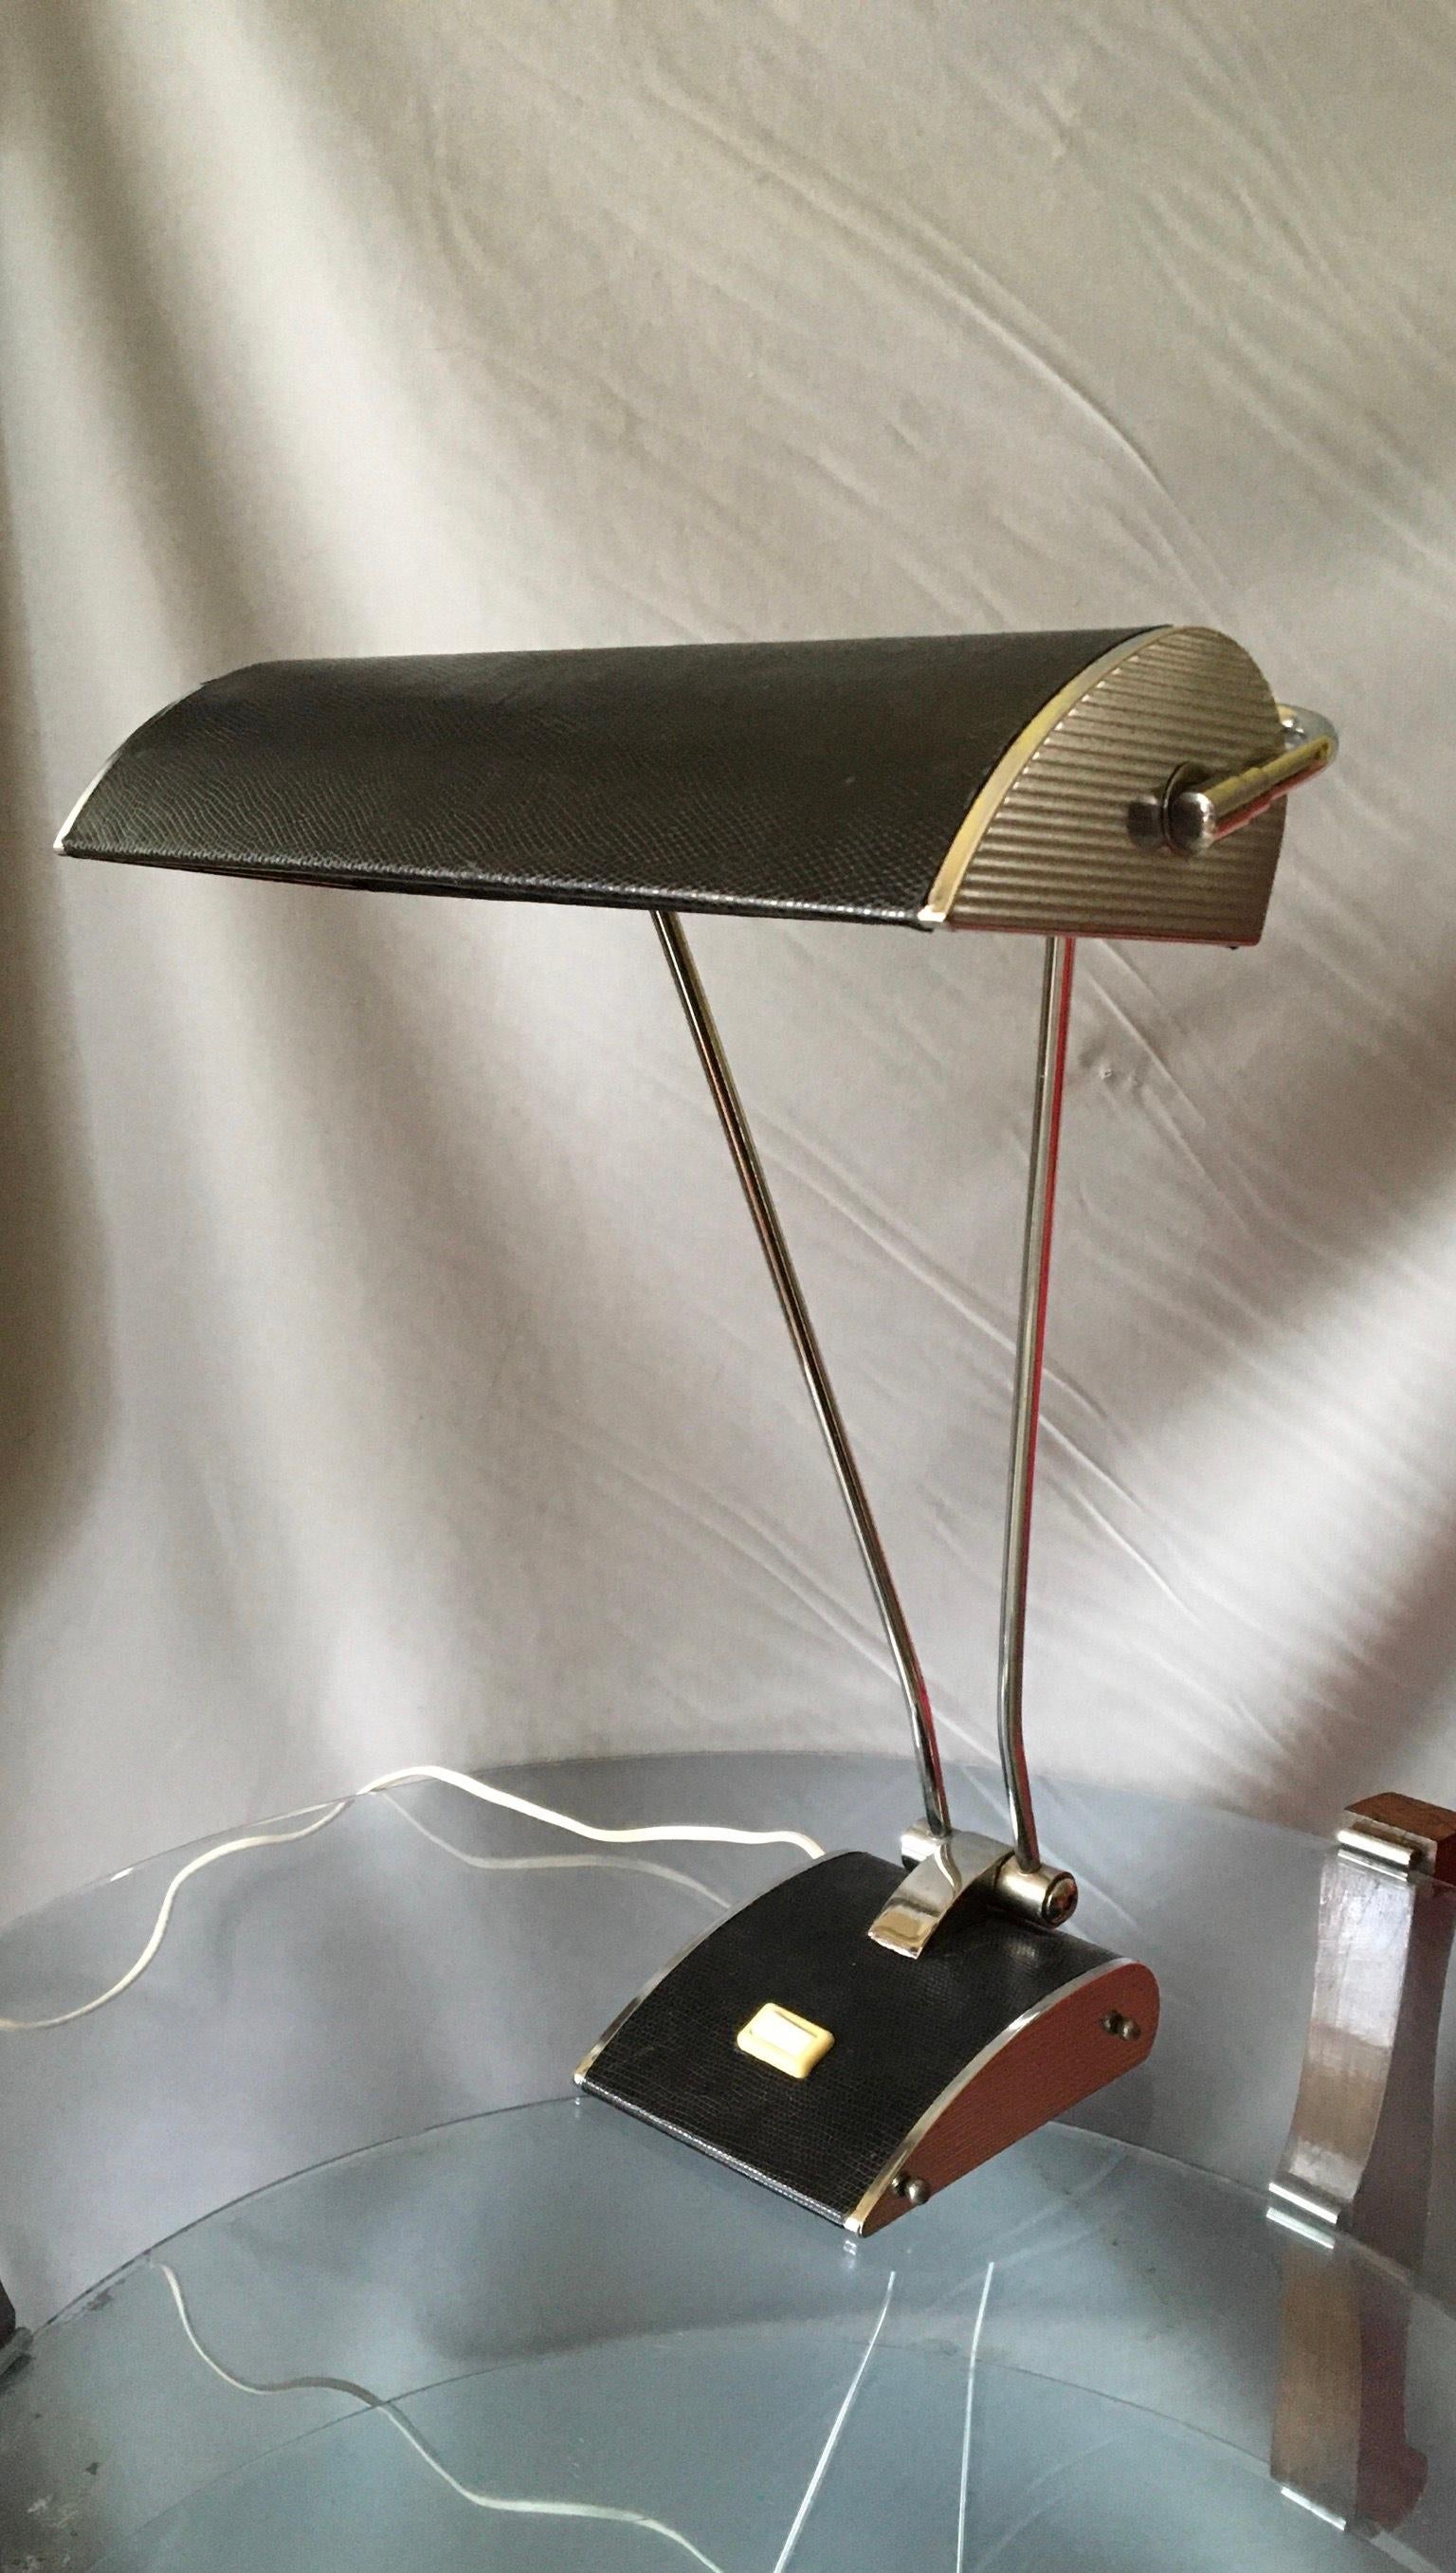 Very stylish French Mid-Century Modern table lamp of the 50’s design by Eileen Gray in aviation style chrome metal and covered In lézard style.
The reflector can bend and rotate for an optimal lighting.
The lamp is in excellent condition,